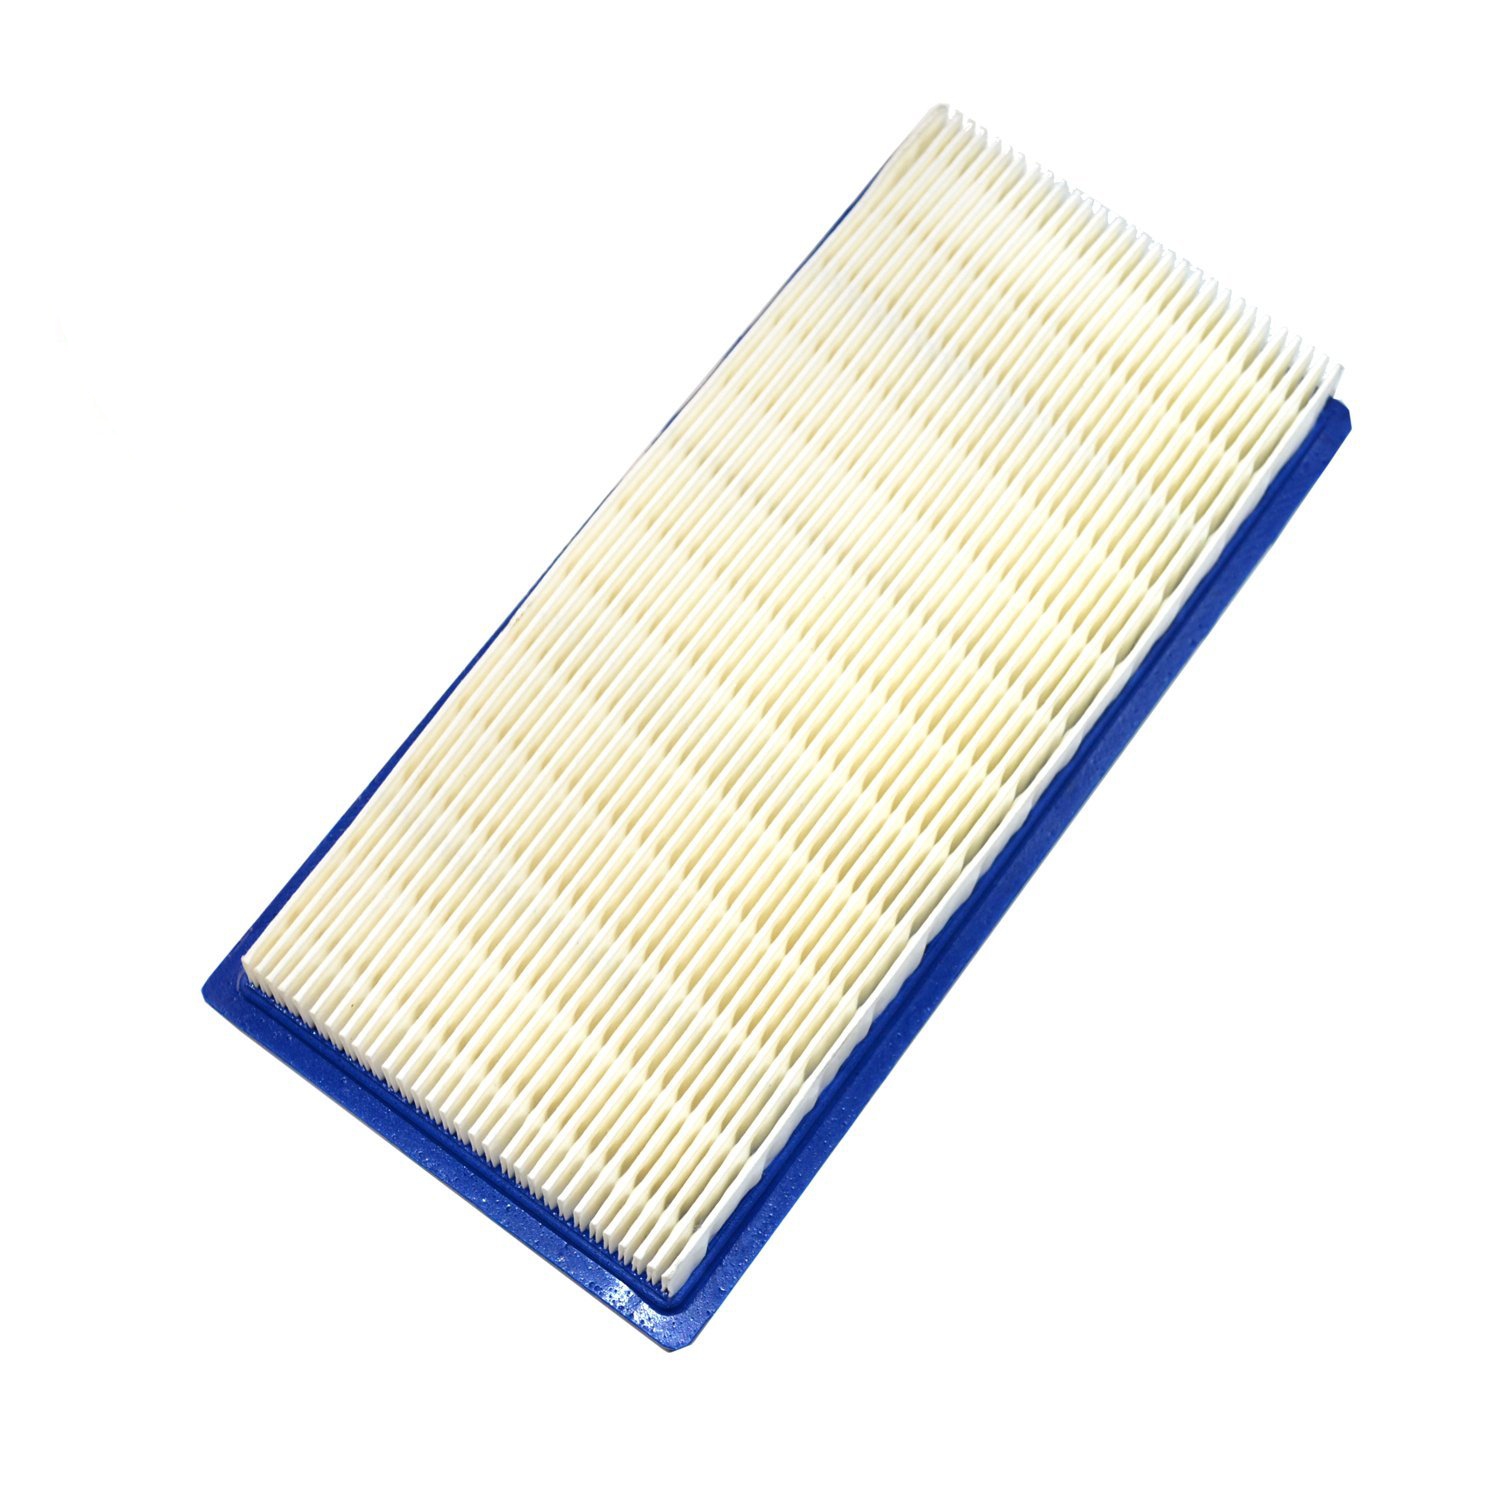 HQRP Air Filter for Generac 9 thru 13 HP (18 and 23-24 CID) Single Cylinder Vanguard engines 0710266 / 710266 Replacement 